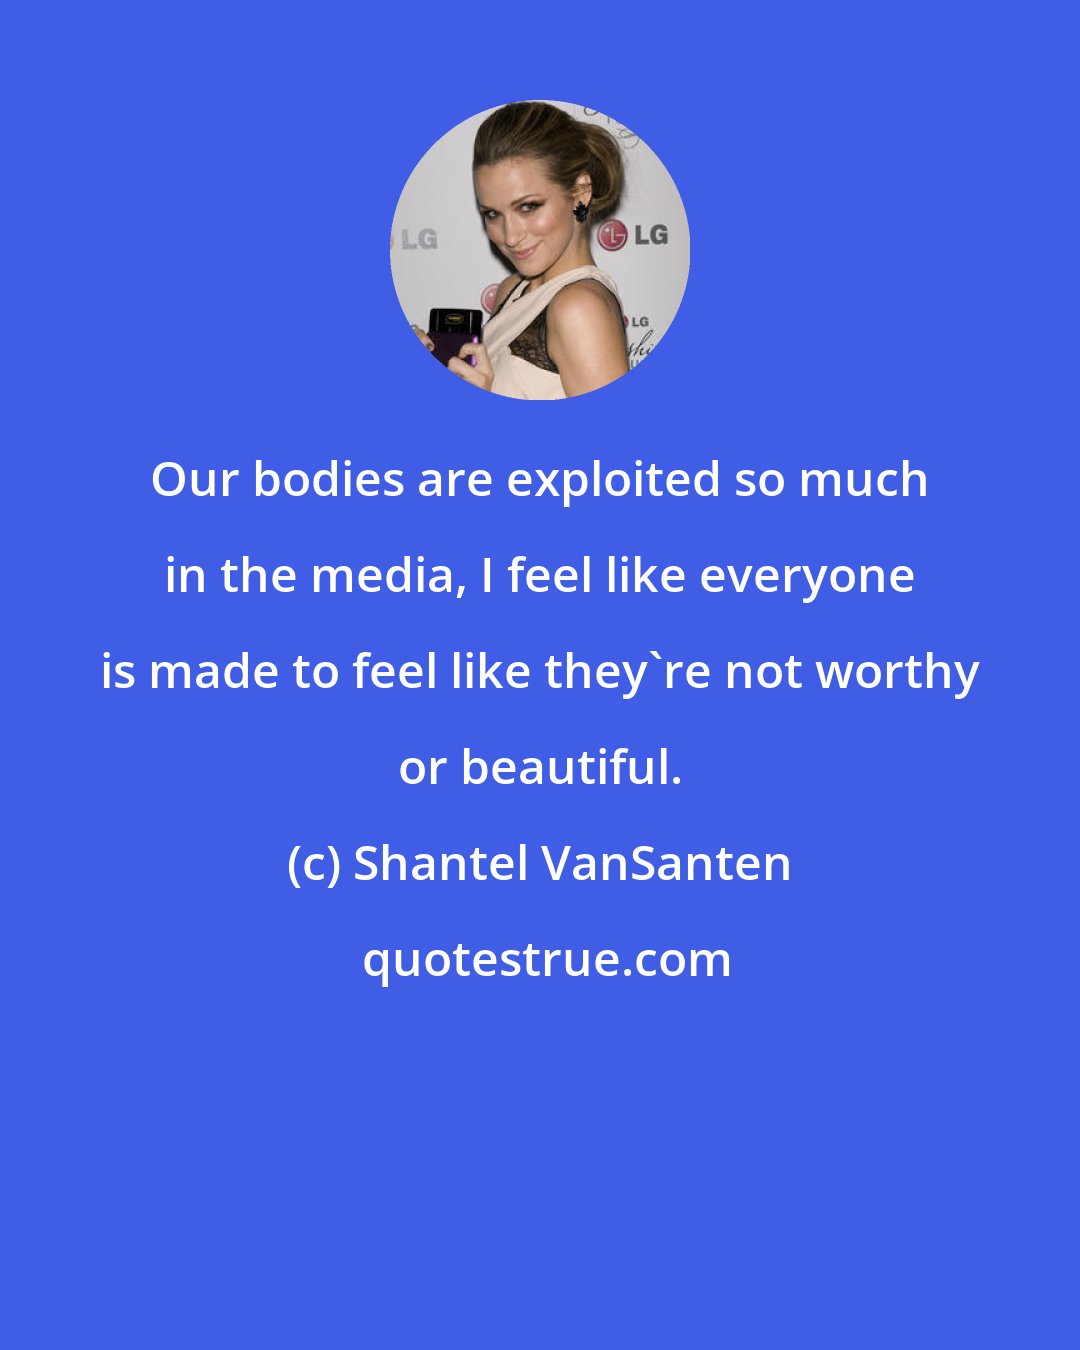 Shantel VanSanten: Our bodies are exploited so much in the media, I feel like everyone is made to feel like they're not worthy or beautiful.